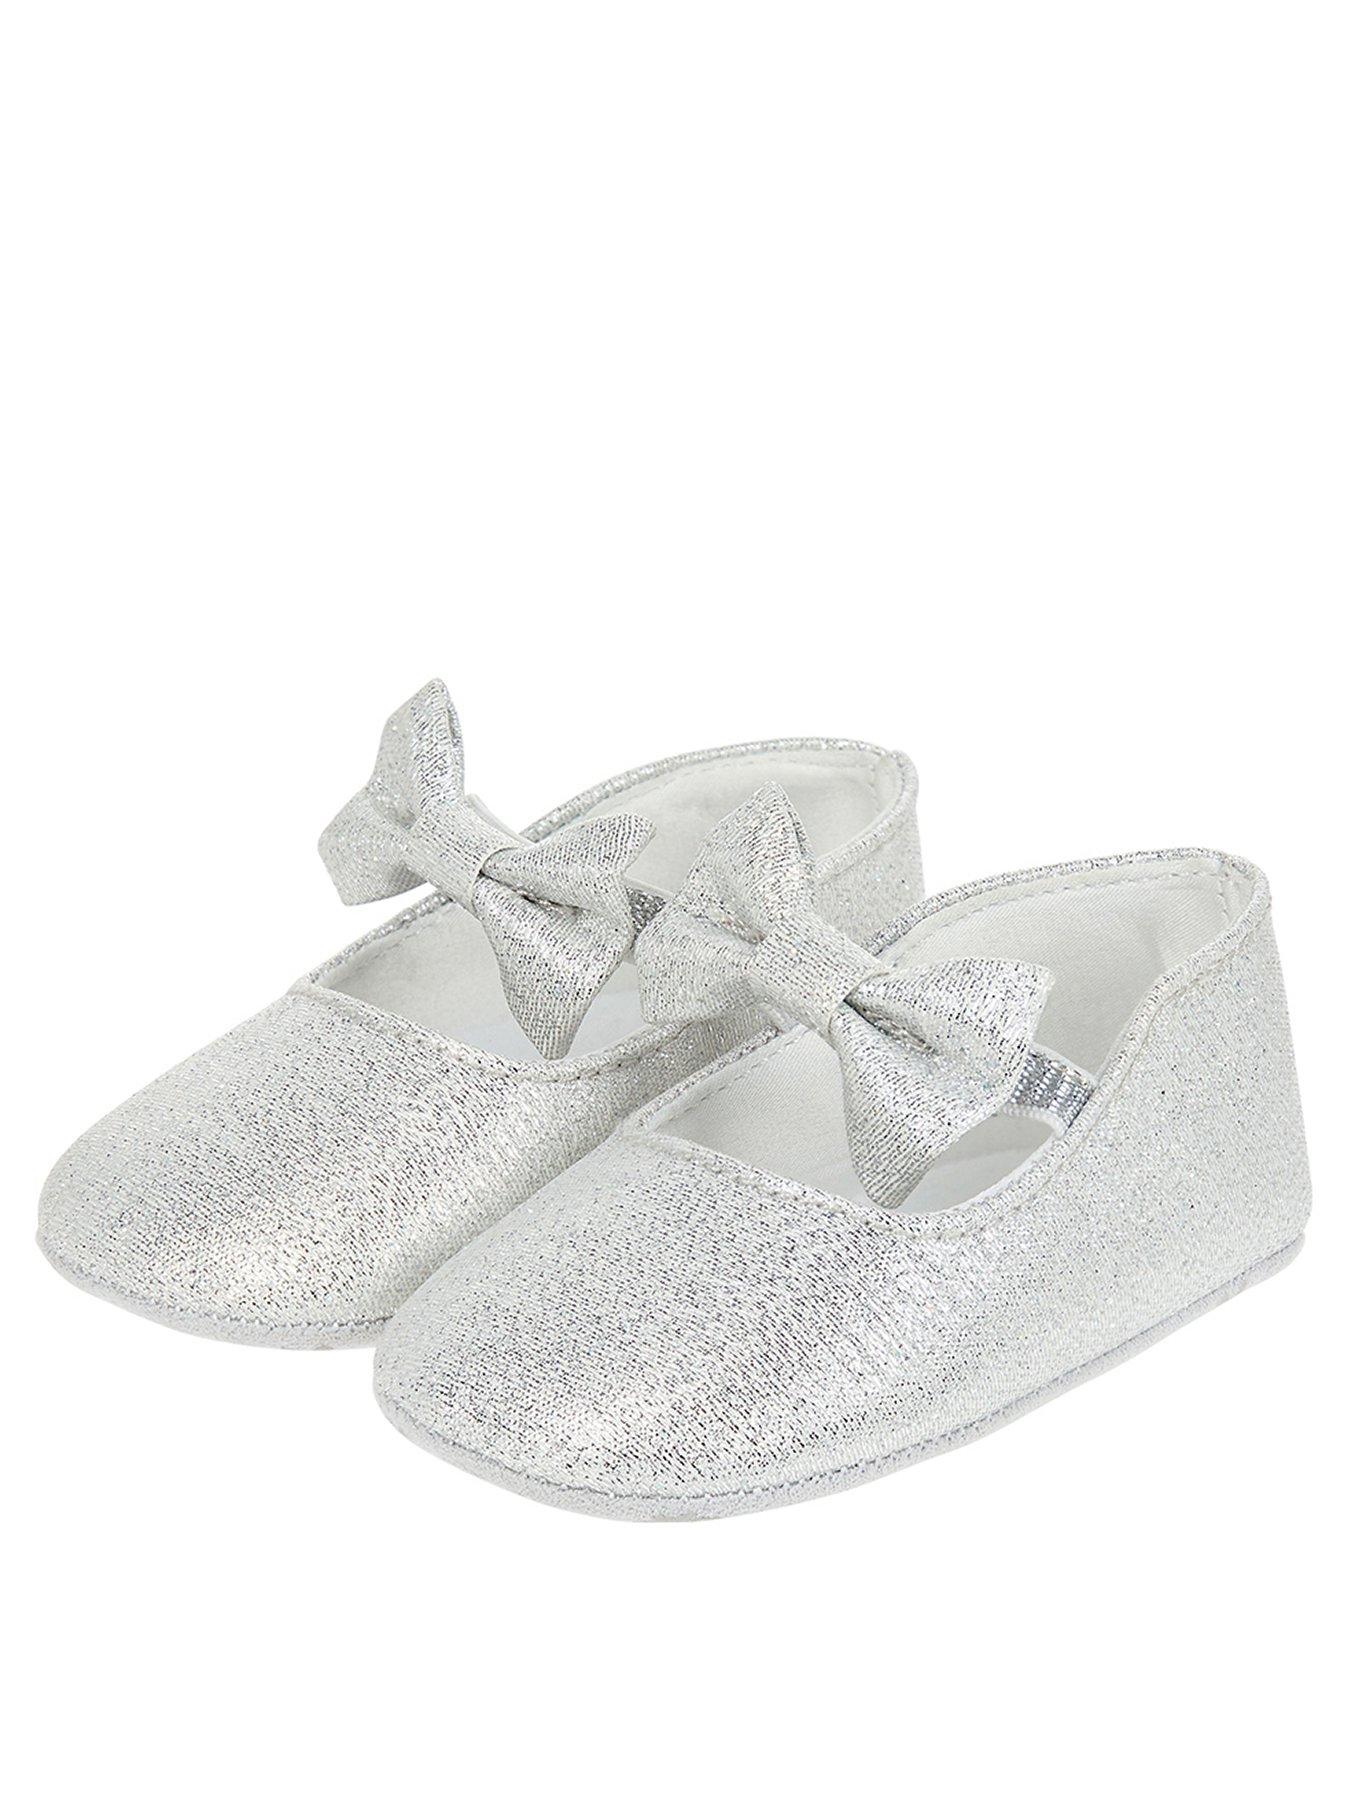 silver baby boots